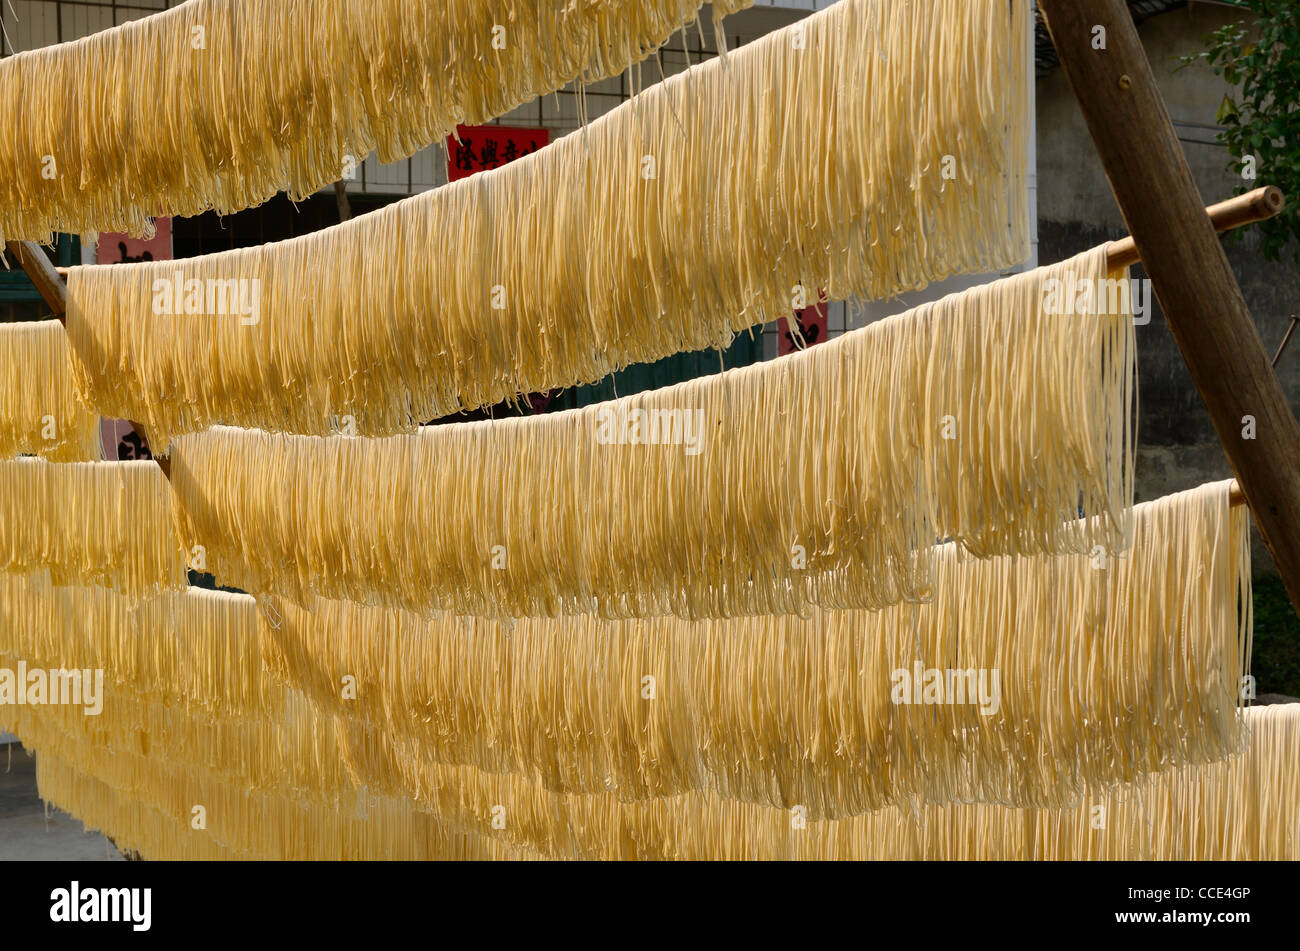 Noodles hanging outside in the sun to dry on rods in Fuli near Yangshuo China Stock Photo